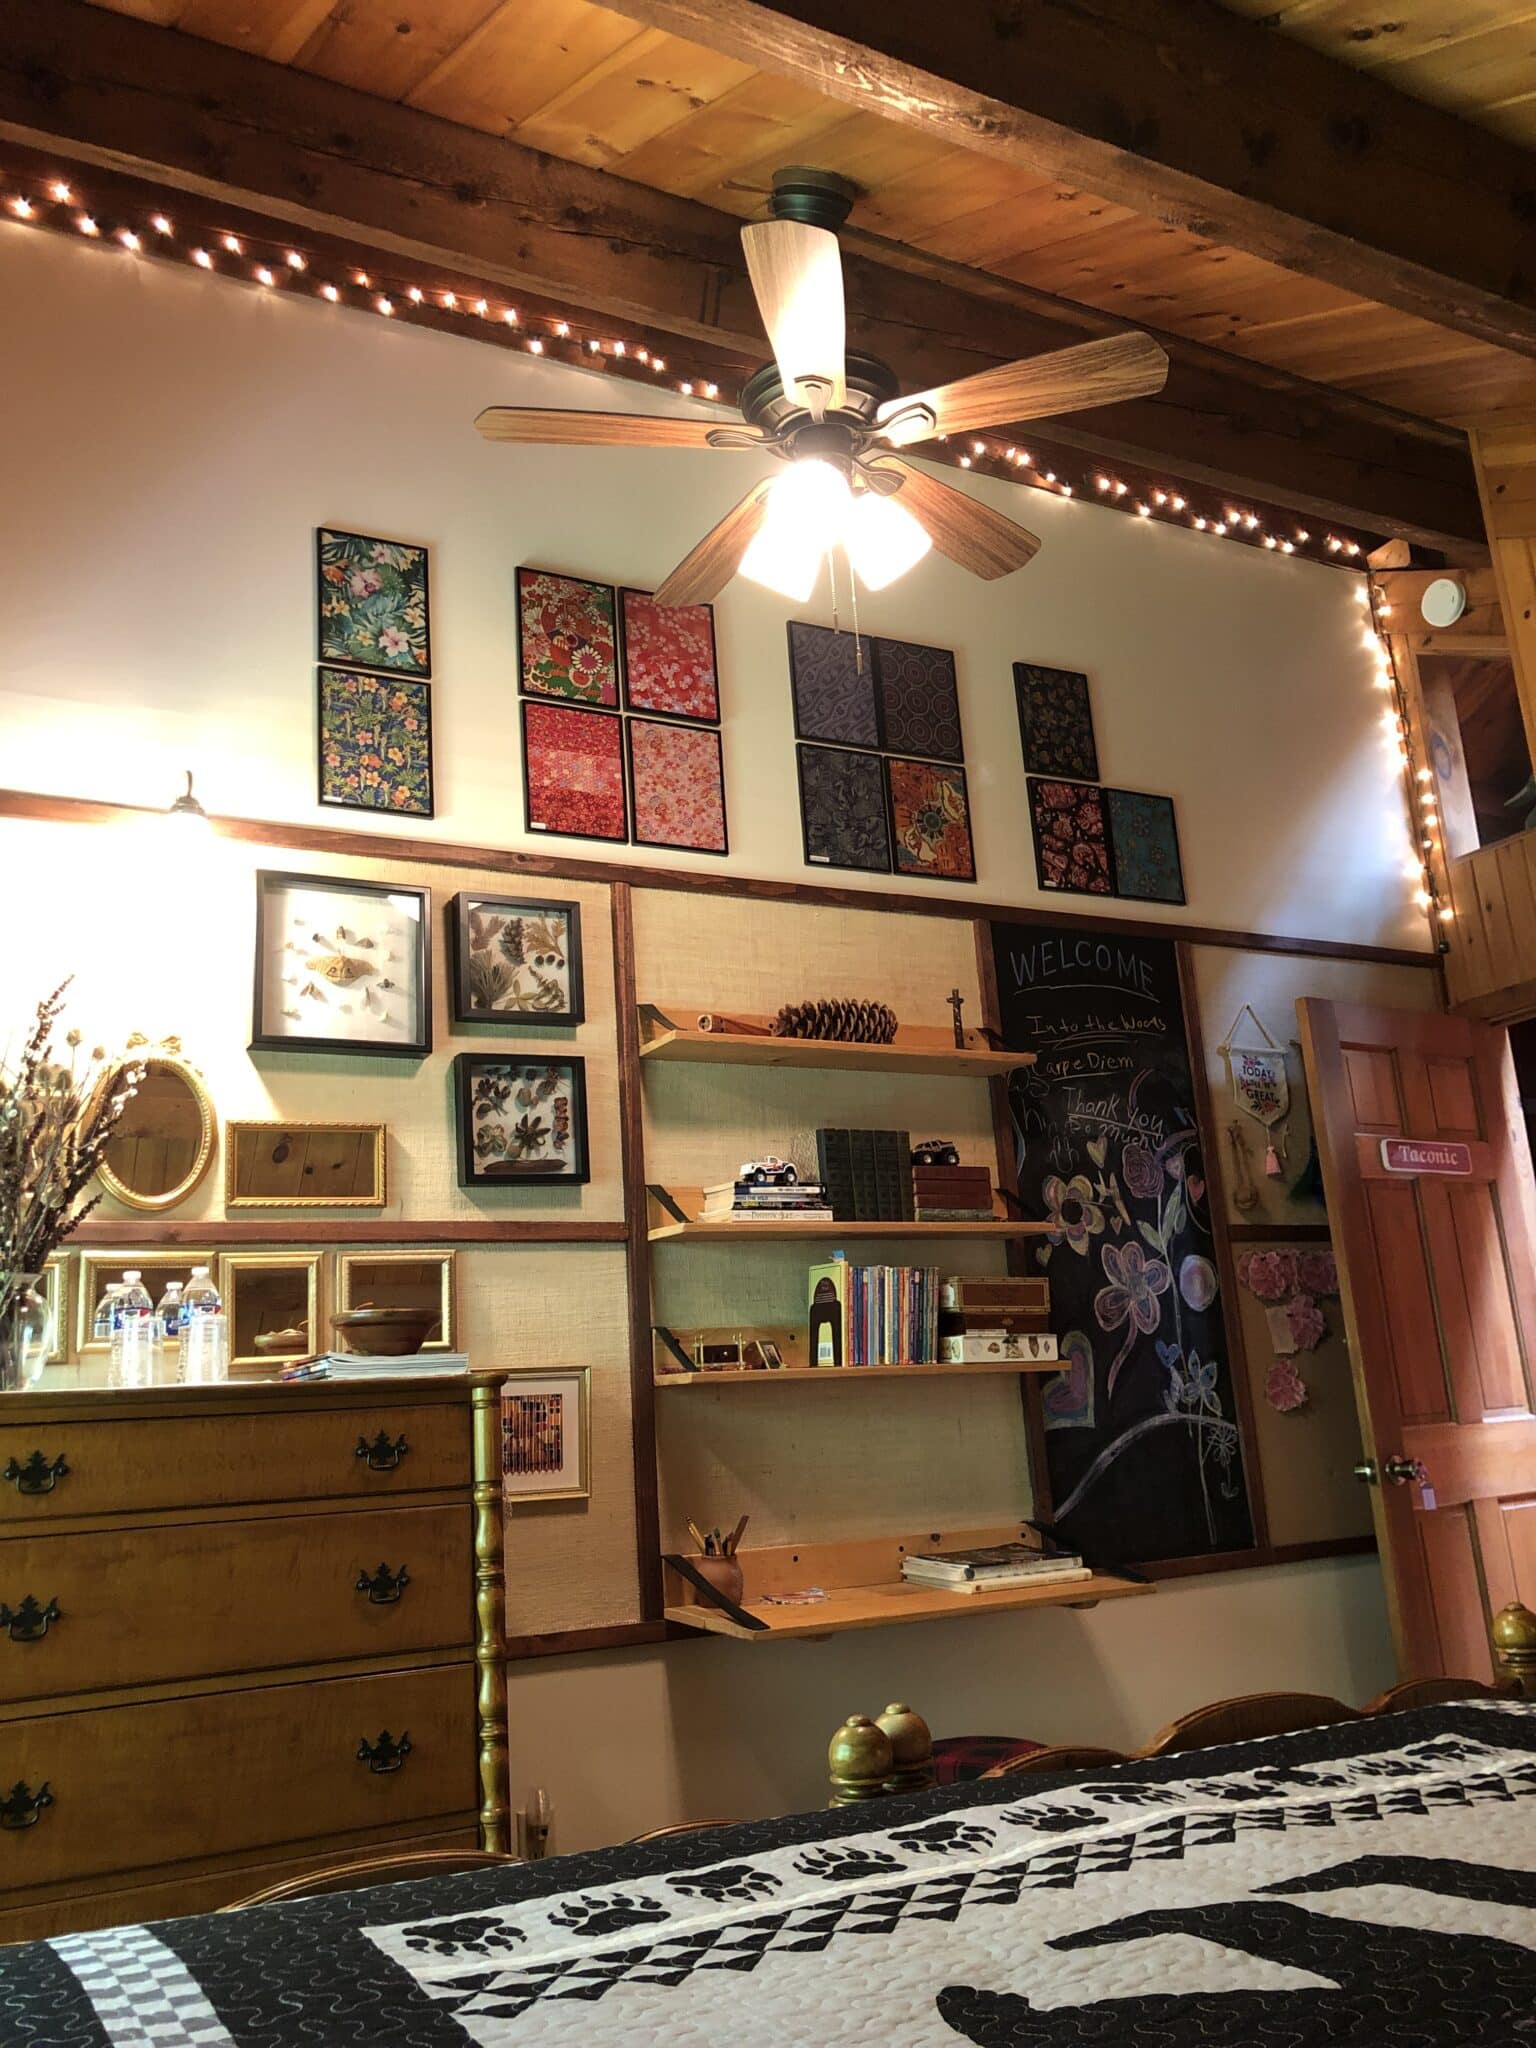 The Taconic Room decor wall of interesting items has added several new  to see including framed fabrics for far away places., and twinkle lights.